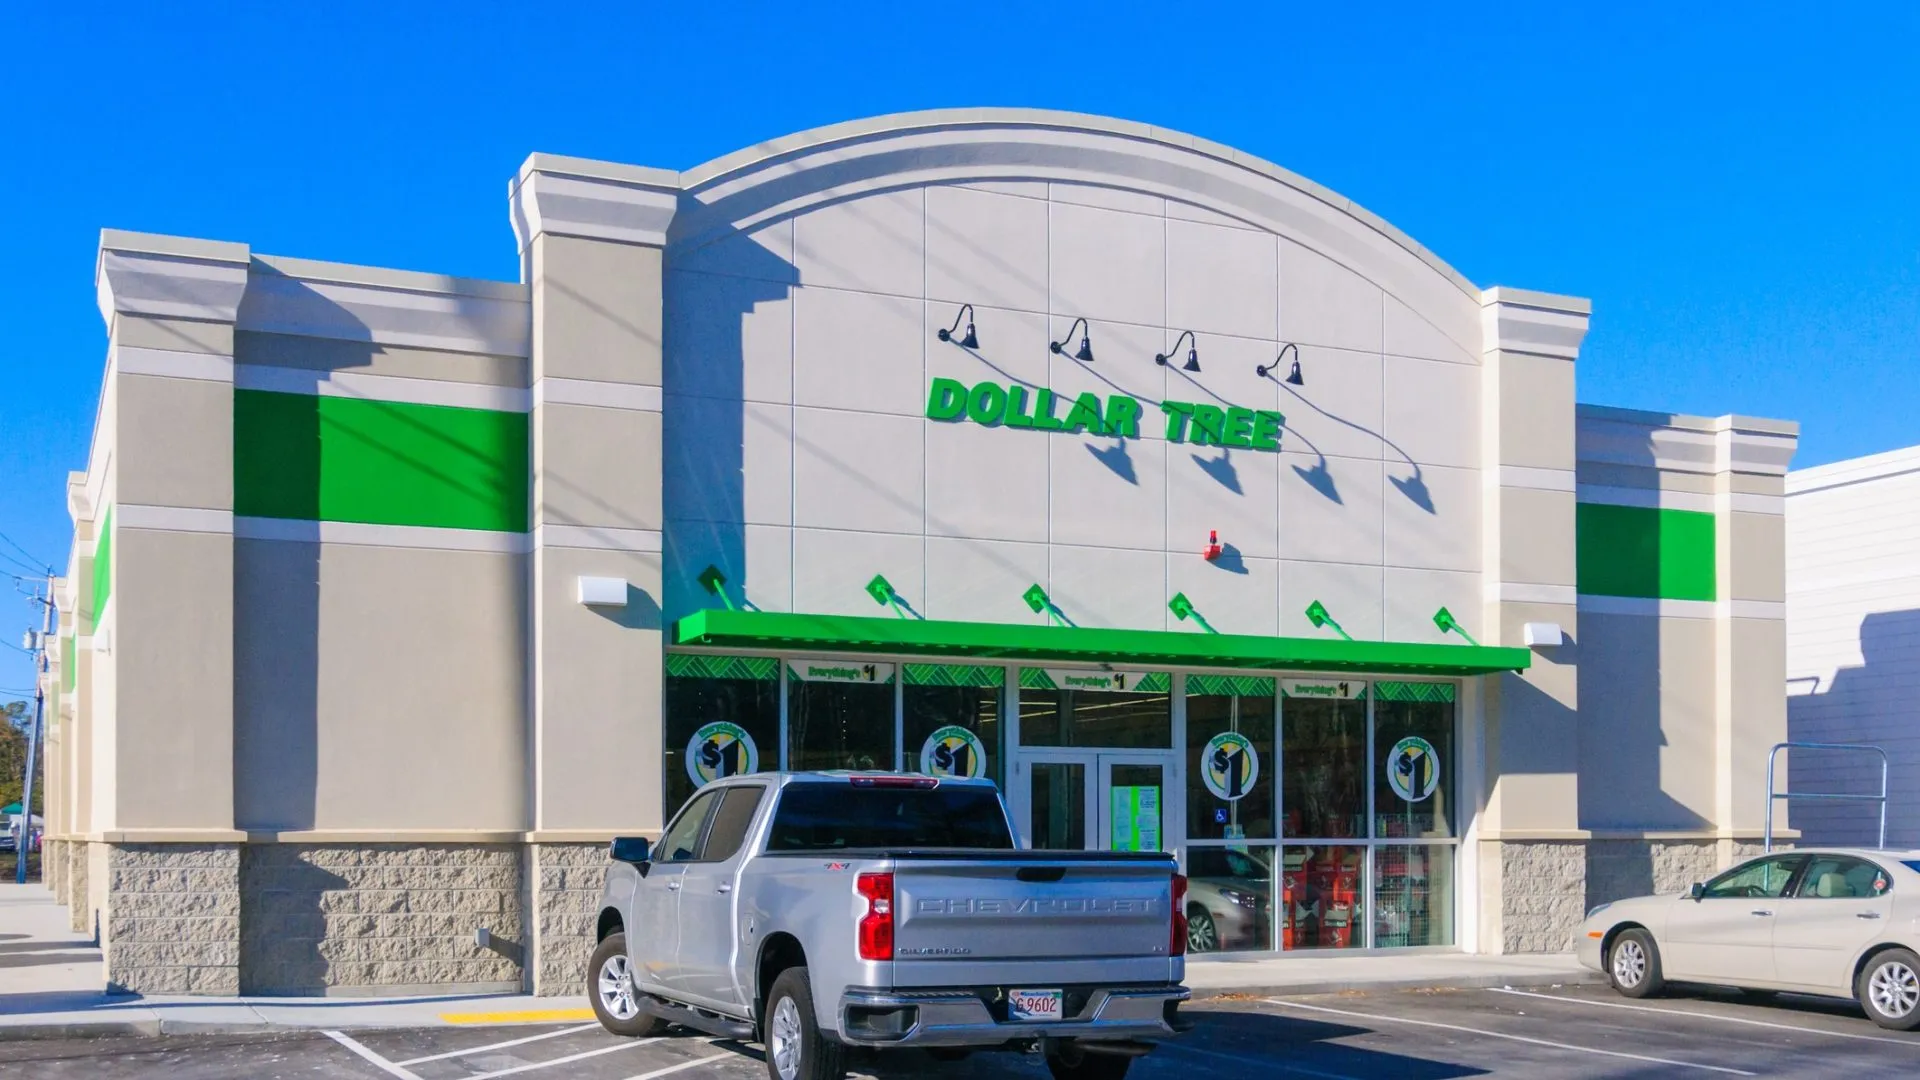 Sandwich, Massachusetts, USA-January 8, 2021- The modern looking front facade of the Dollar Tree store that recently opened in Sandwich, Massachusetts.